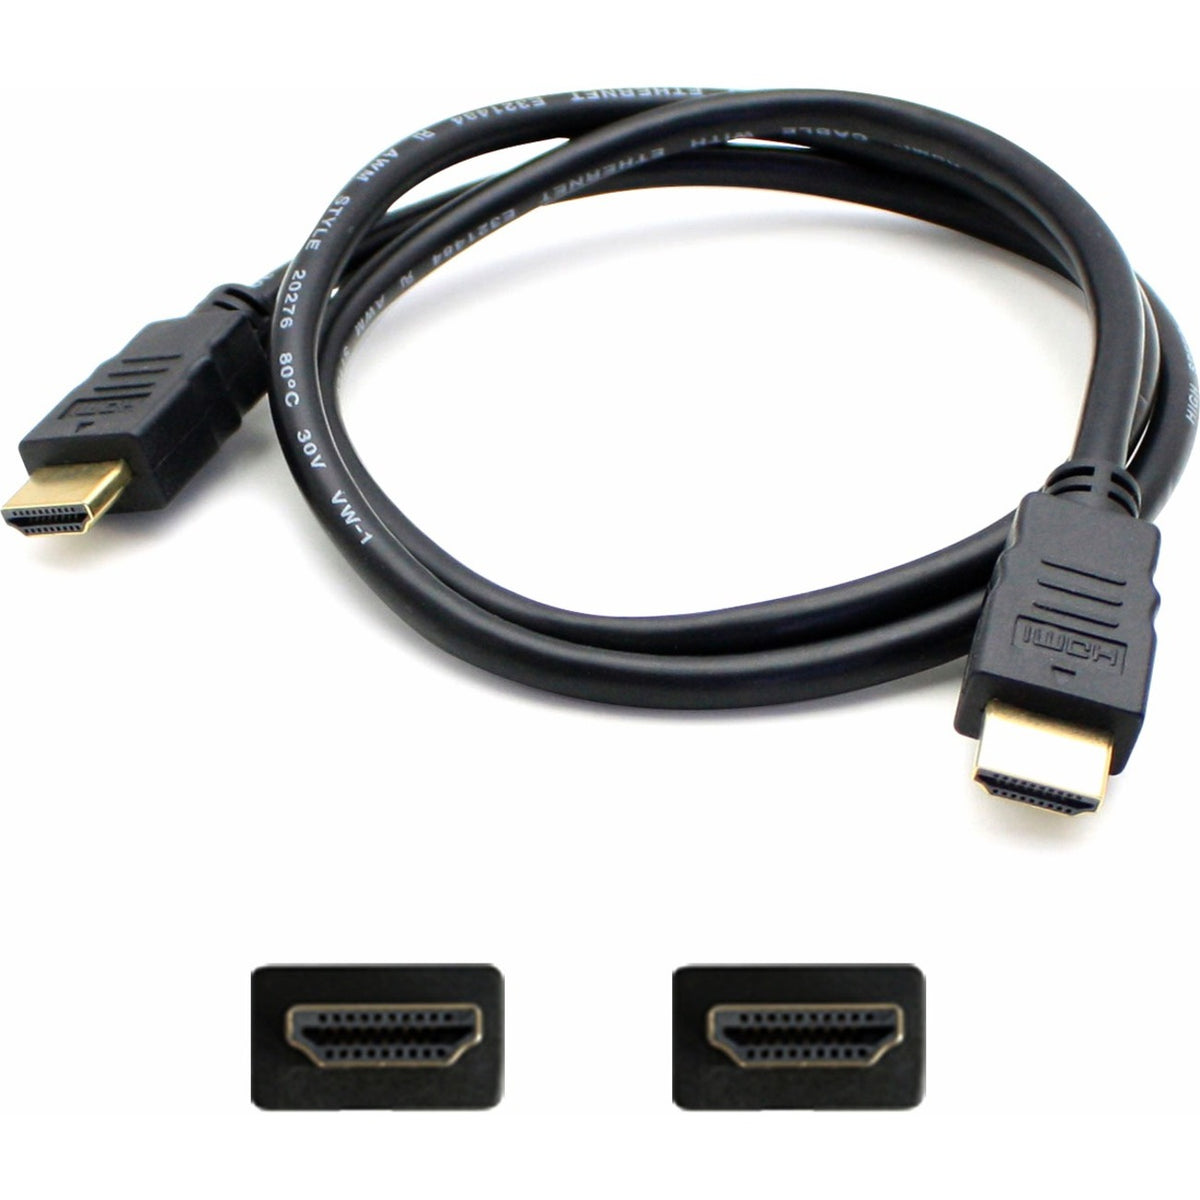 35ft HDMI 1.4 Male to HDMI 1.4 Male Black Cable For Resolution Up to 4096x2160 (DCI 4K) - HDMIHSMM35